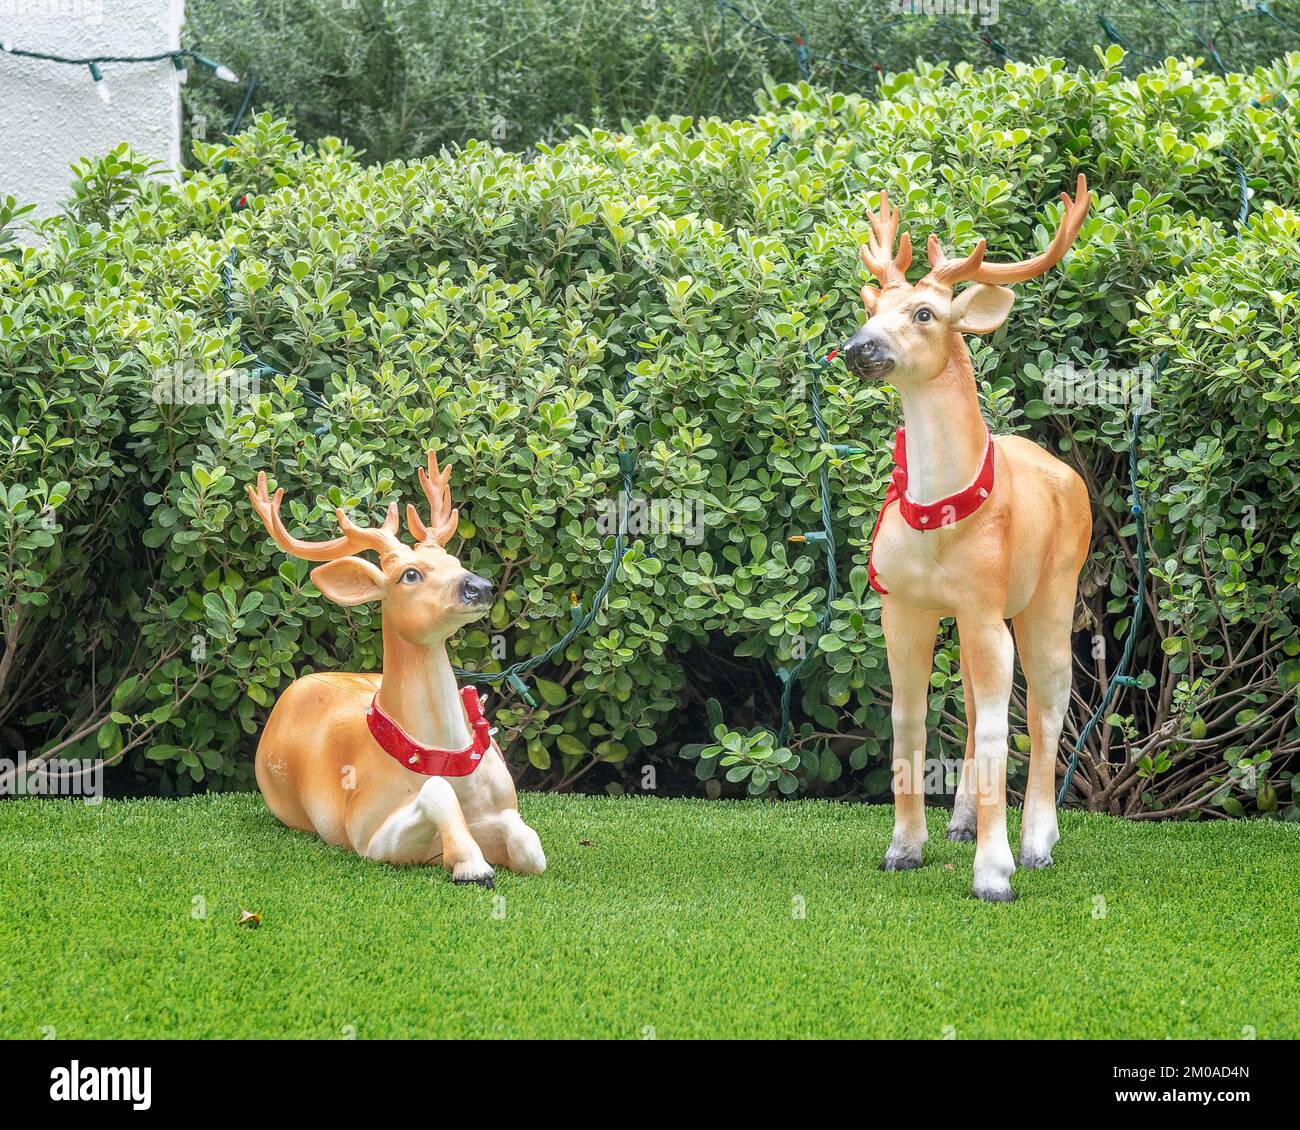 Two reindeer lawn decoration statues stand in a front yard. Stock Photo